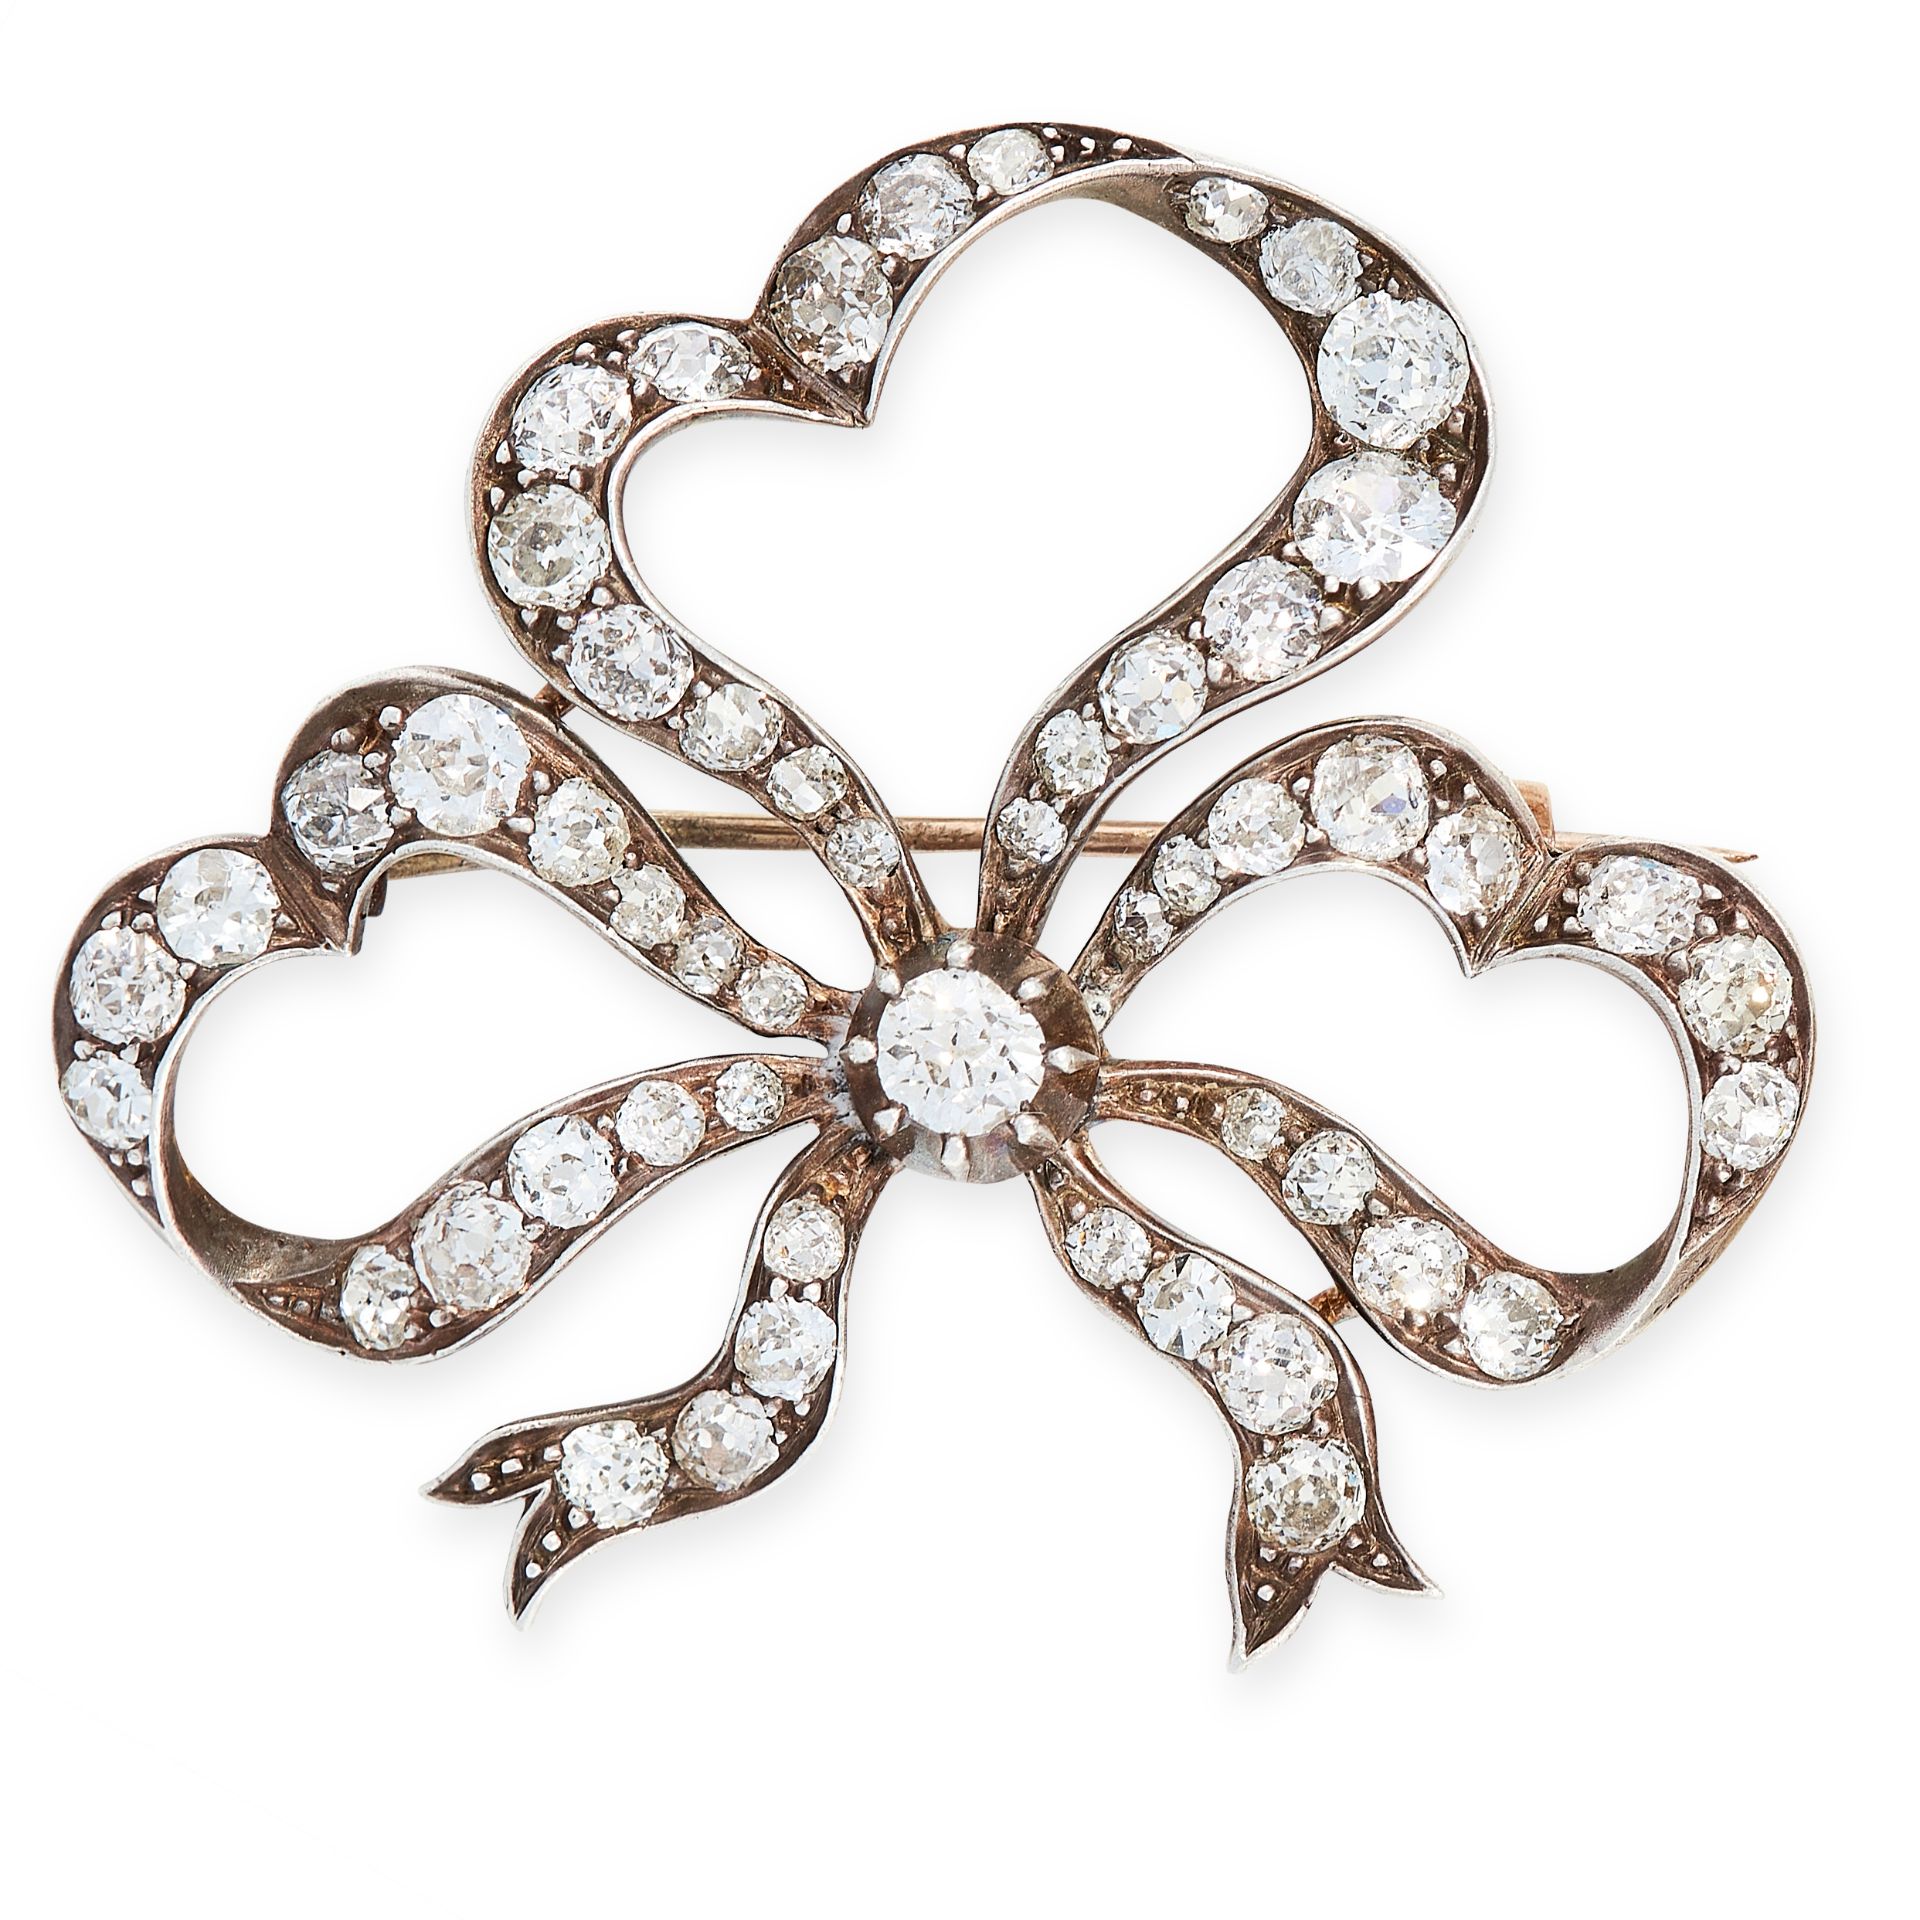 AN ANTIQUE DIAMOND BROOCH, 19TH CENTURY in yellow gold and silver, designed as a ribbon tied in a